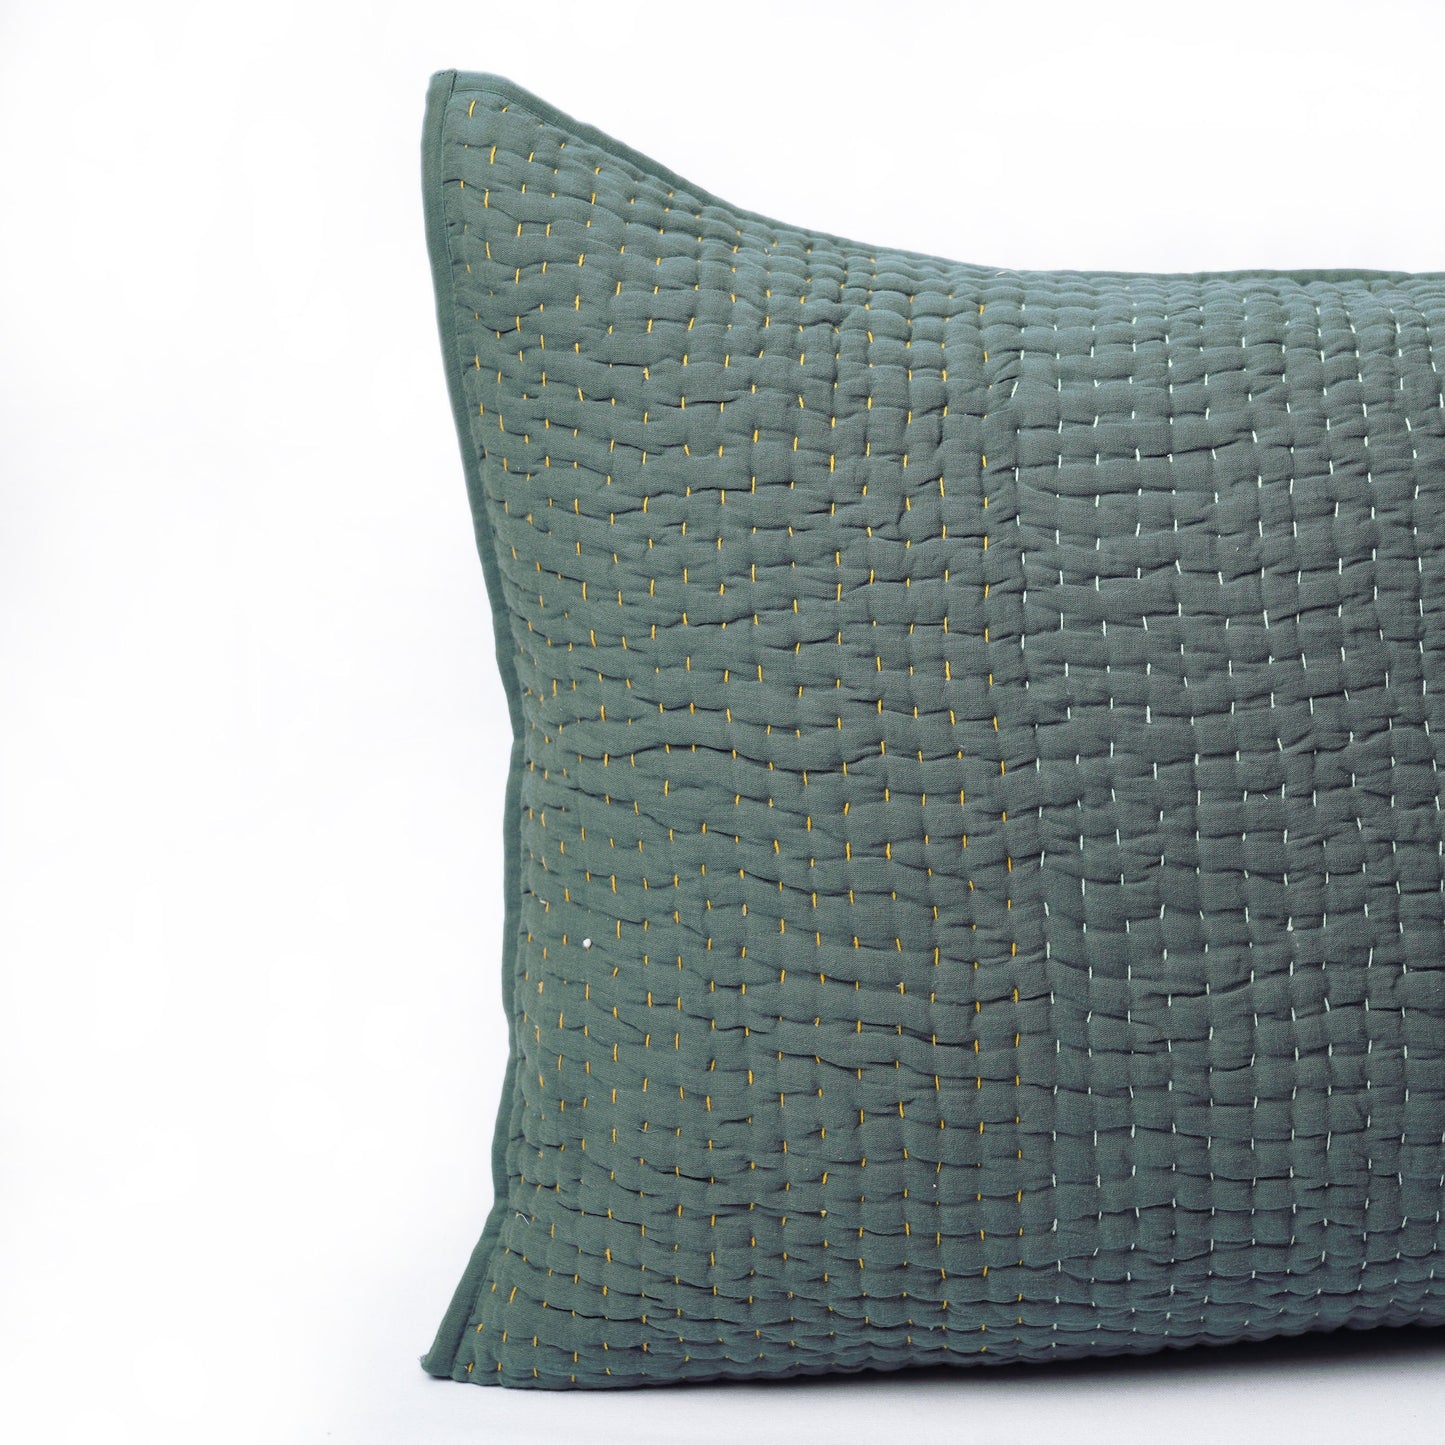 Olive Green quilted pillow shams - hand quilted 4 layer muslin gauze, sizes available